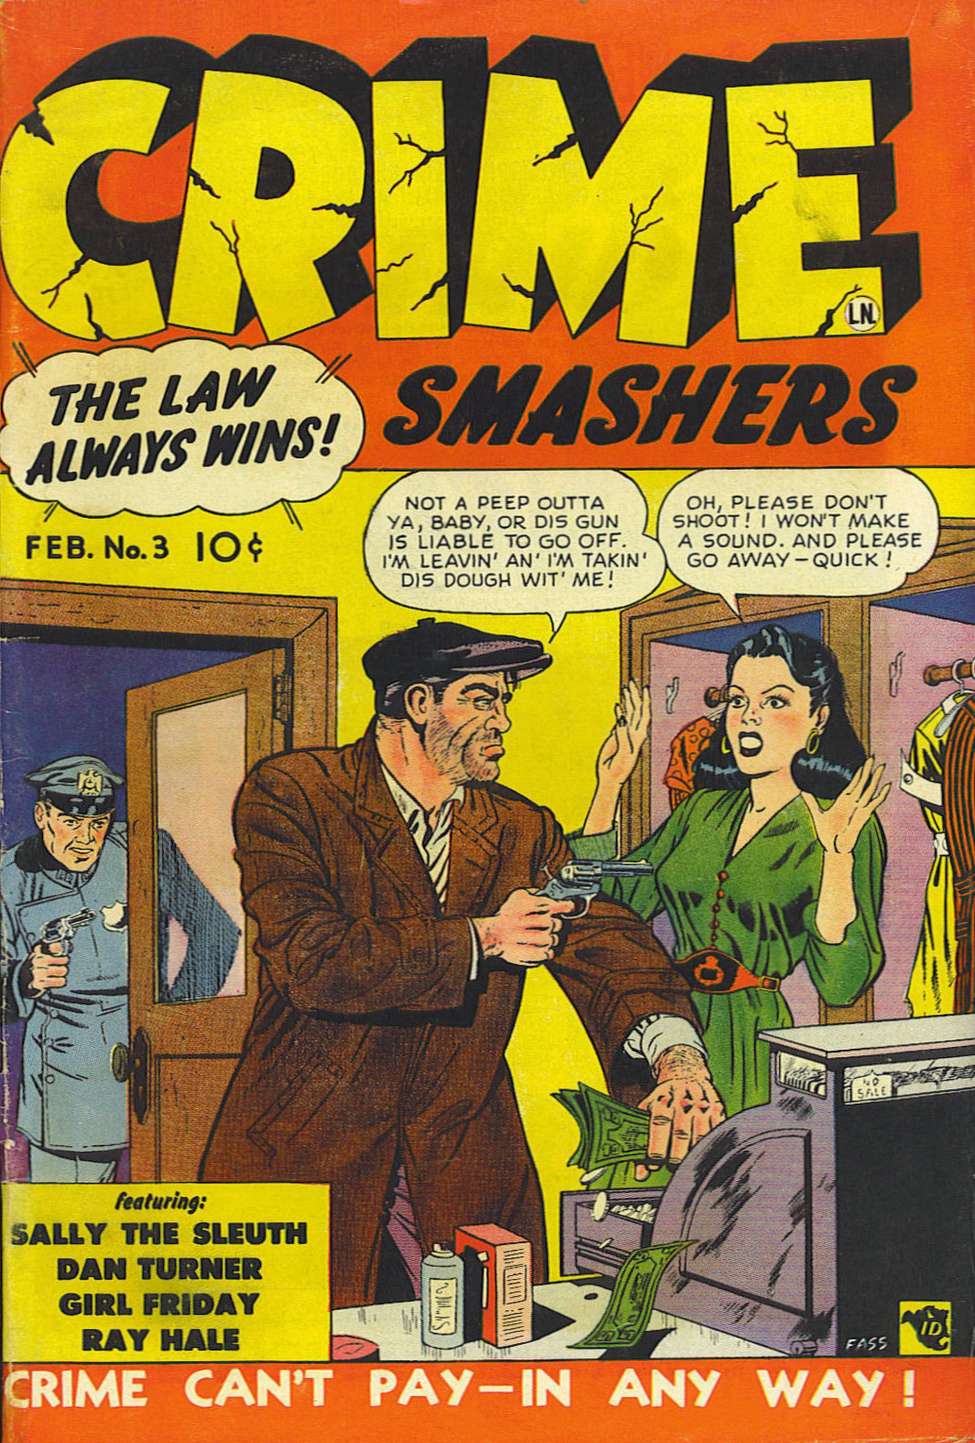 Book Cover For Crime Smashers 3 (alt)